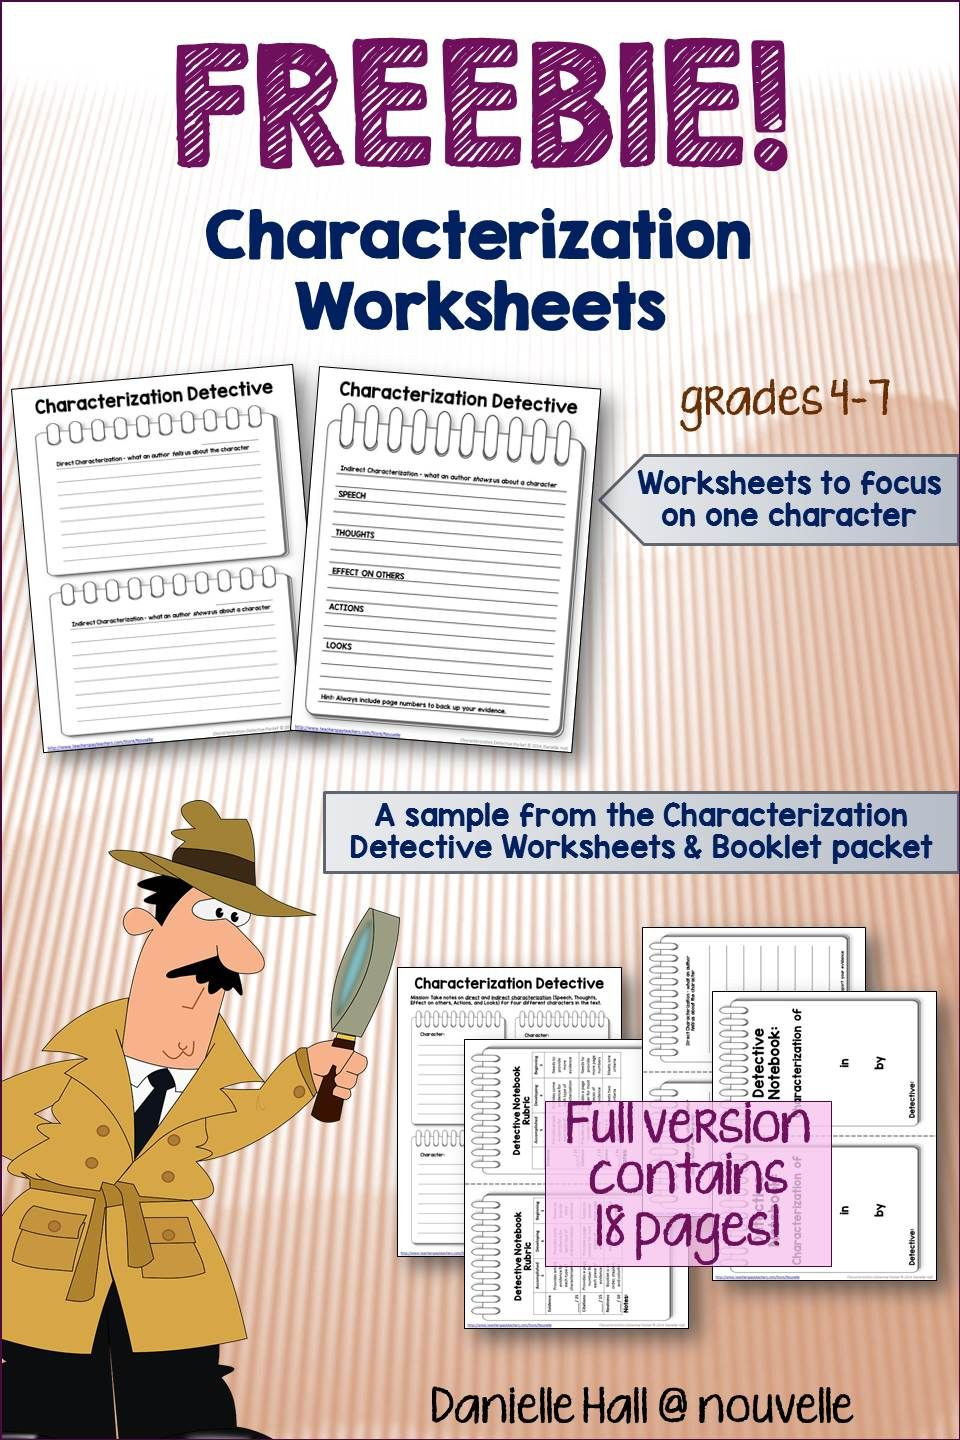 Direct and Indirect Characterization Worksheet Characterization Detective Worksheets Freebie